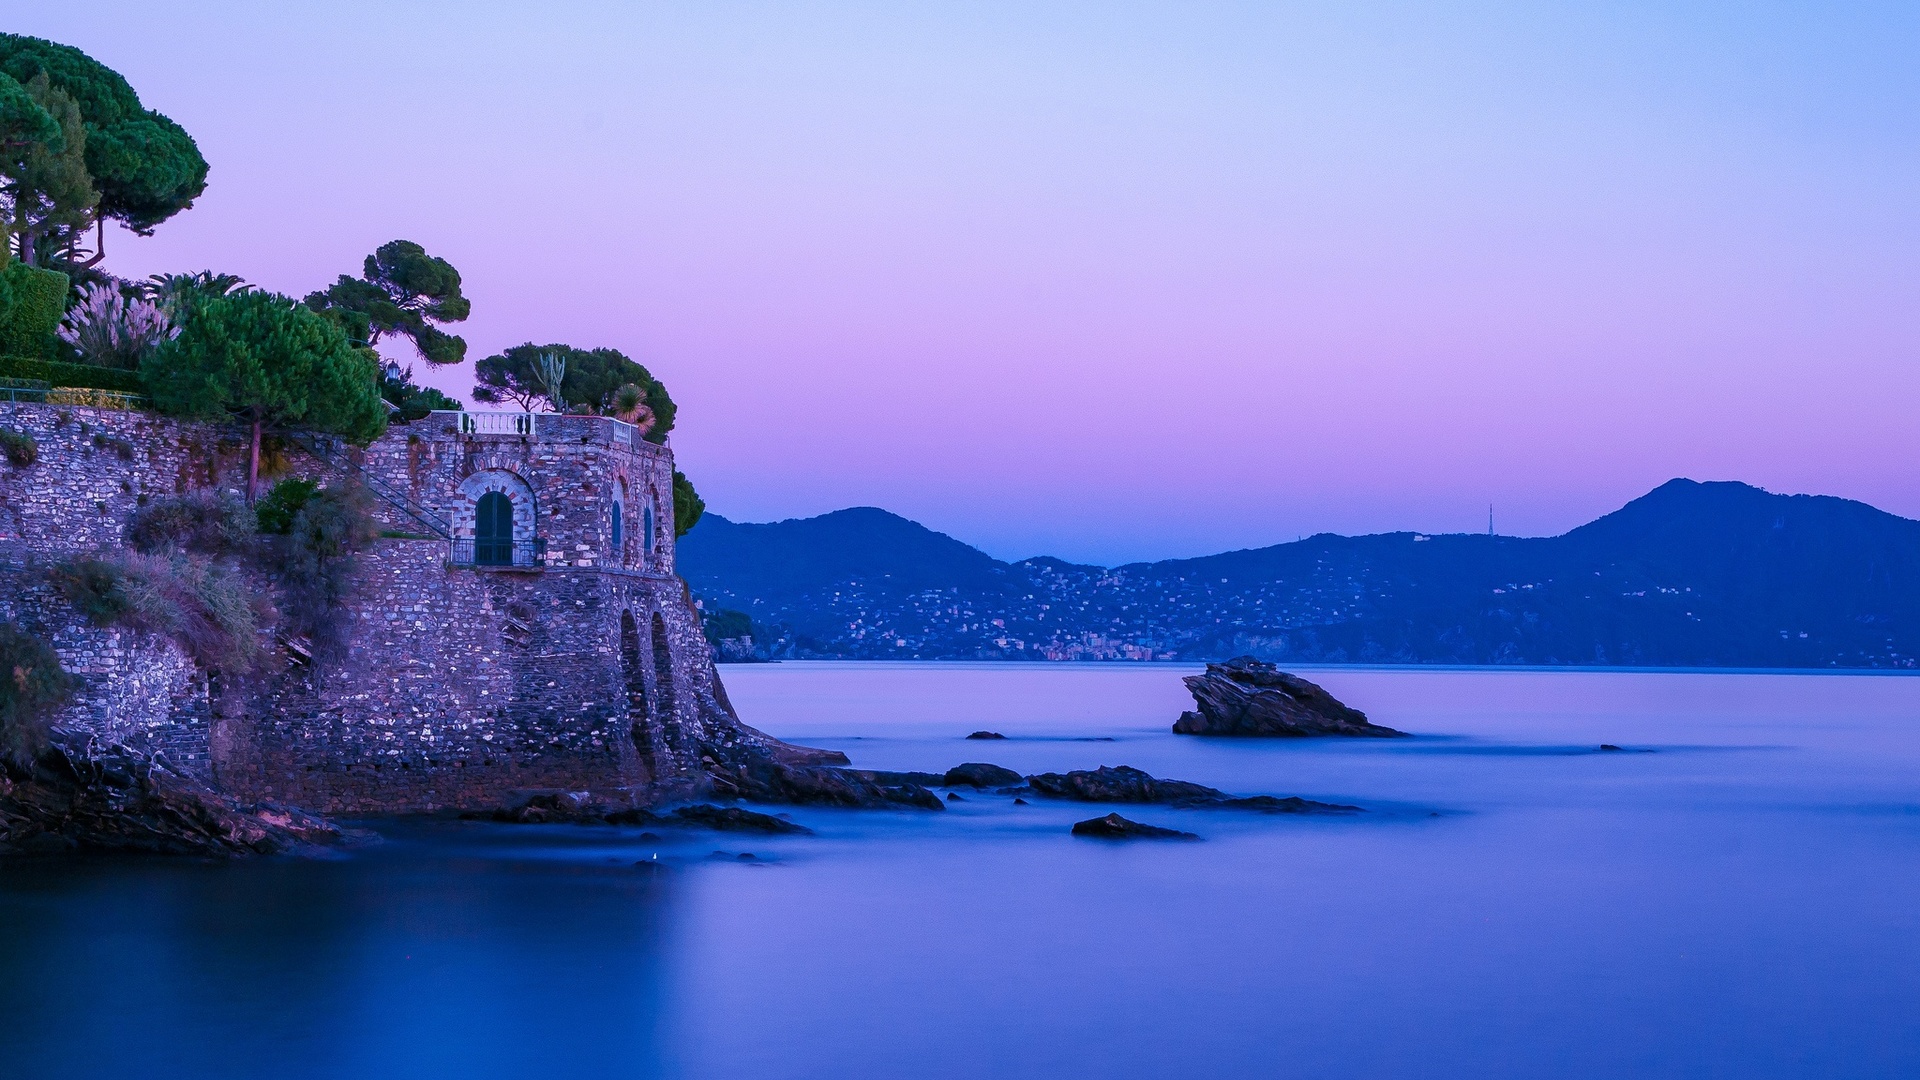 General 1920x1080 nature landscape mountains Italy sea evening rocks fortress old building long exposure clear sky